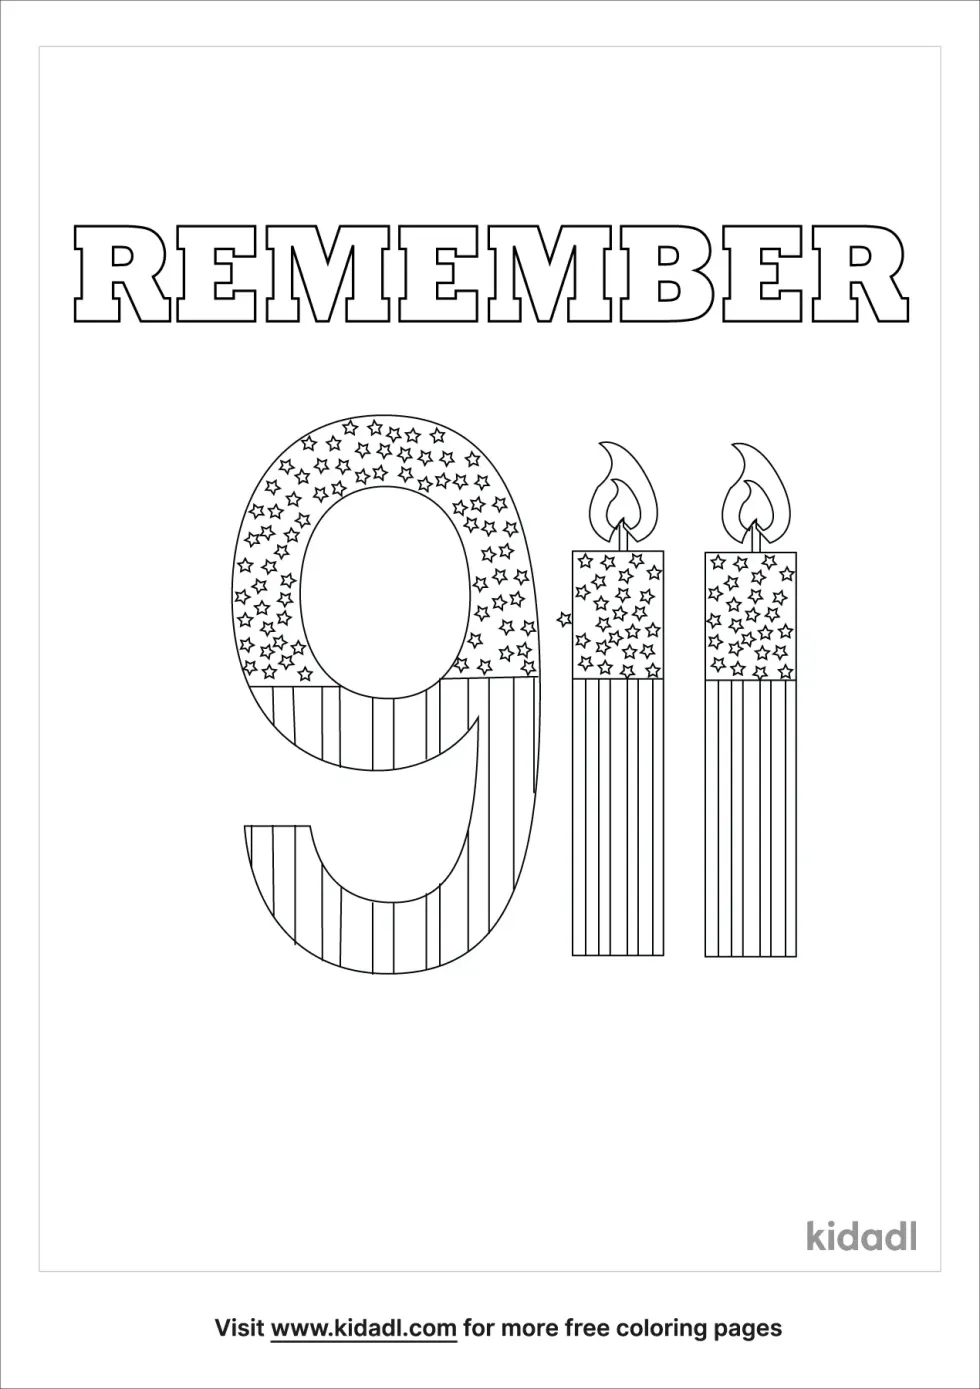 Remember 911 Coloring Page